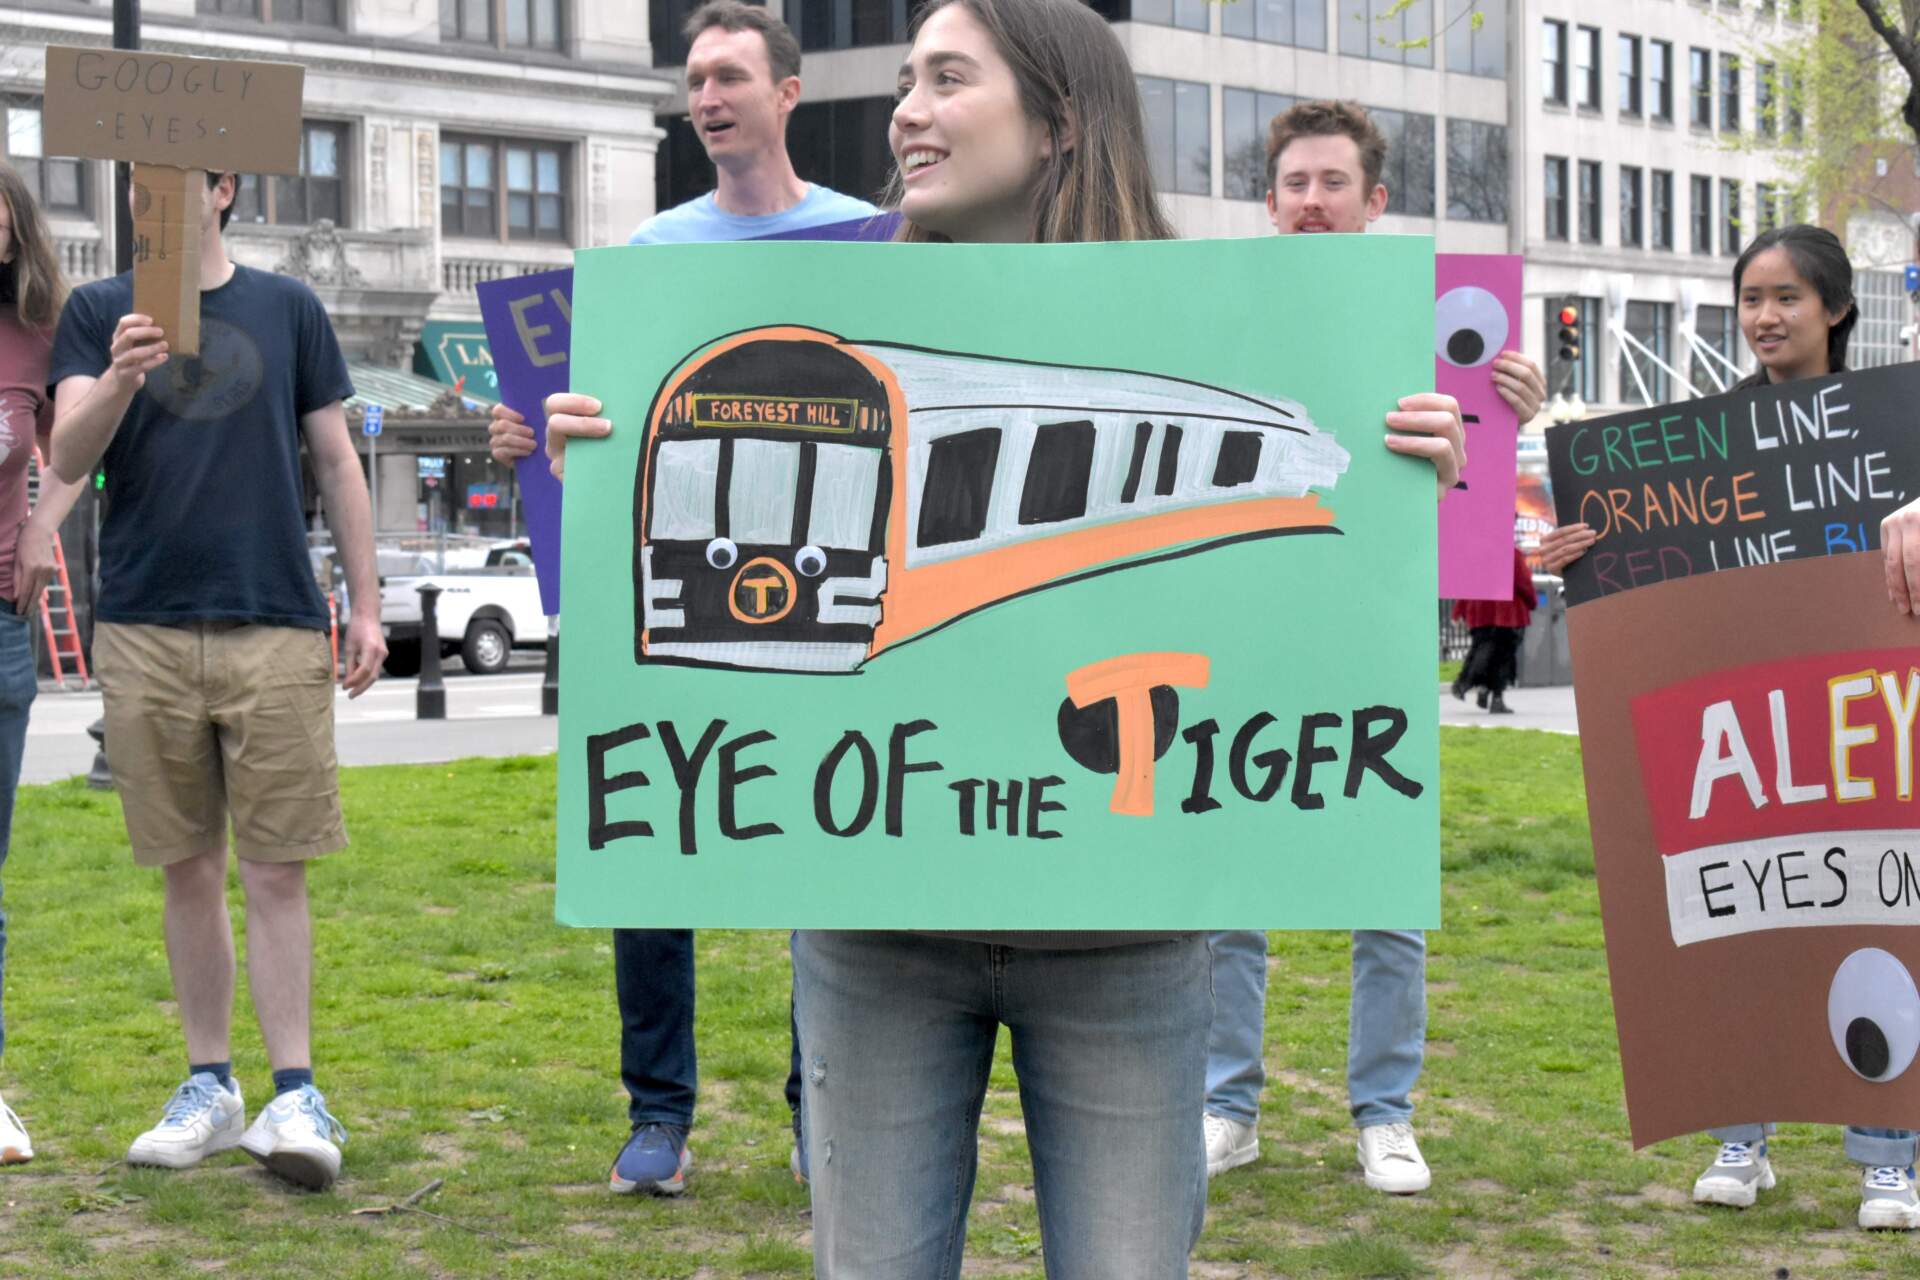 About 20 people gathered on Boston Common to call for the MBTA to put large googly eyes on the front of the trains. (Meghan B. Kelly/WBUR)